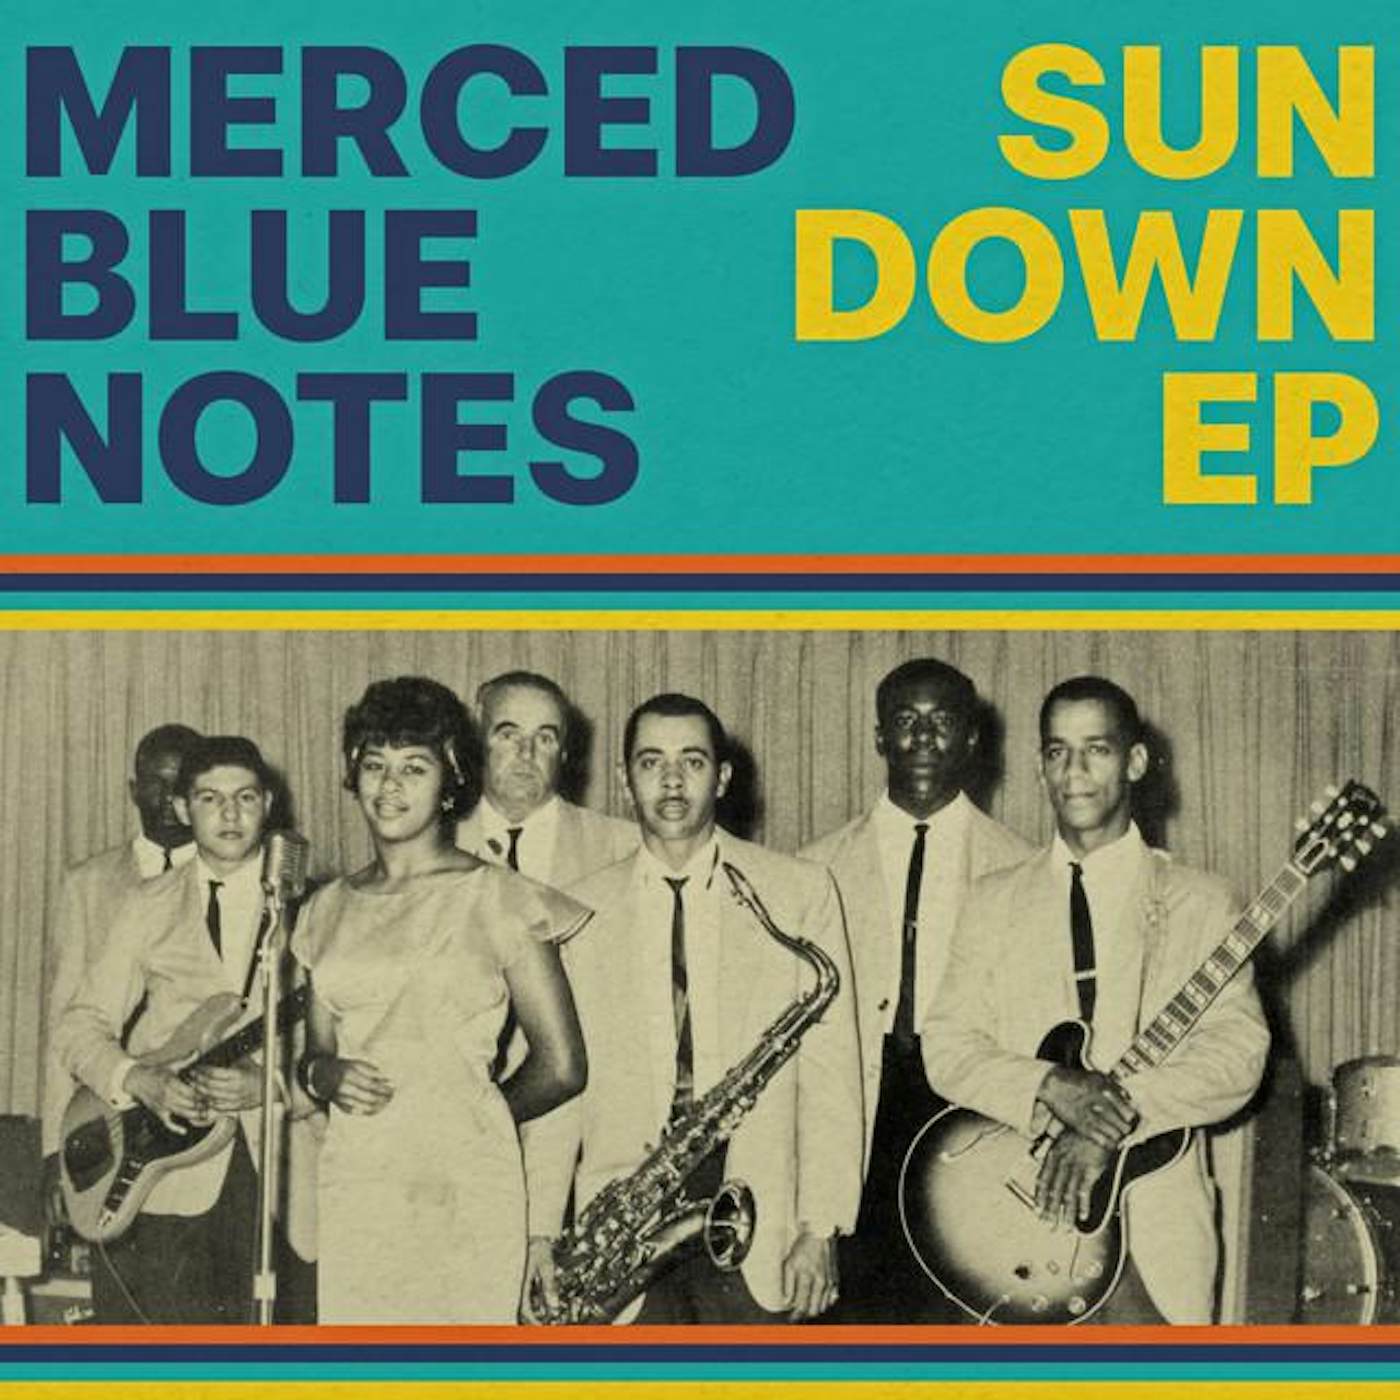 The Merced Blue Notes